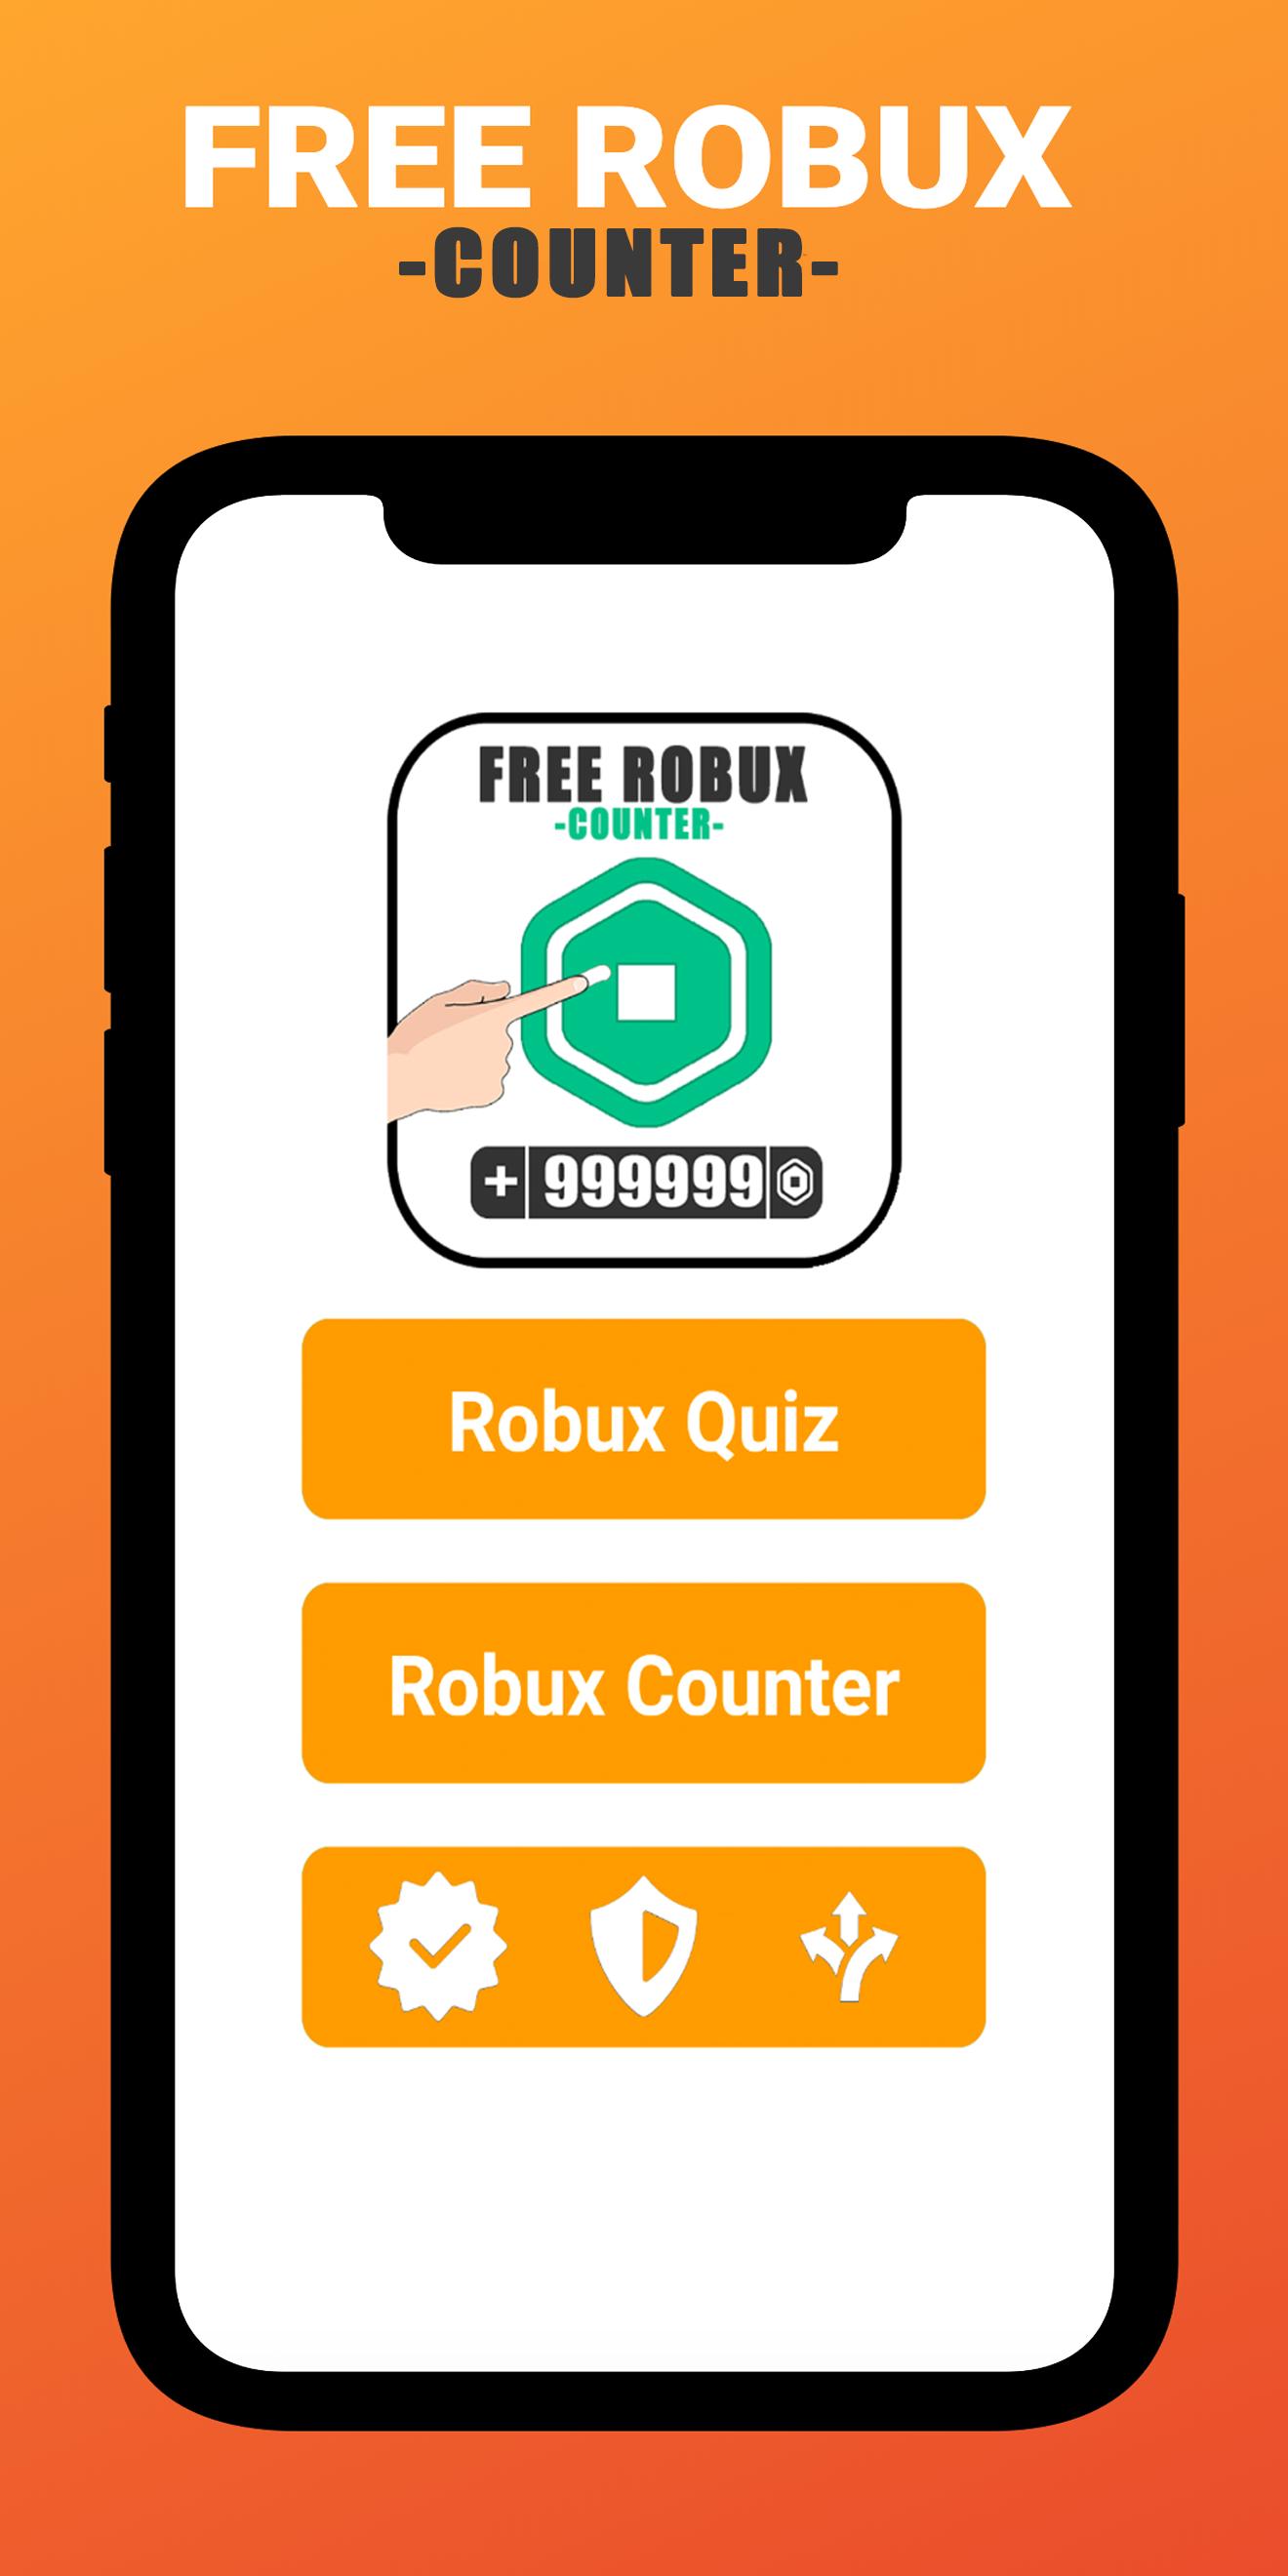 How To Get Free Robux Calc 2020 For Android Apk Download - kostenloser robux calc für roblox 2020 für android apk